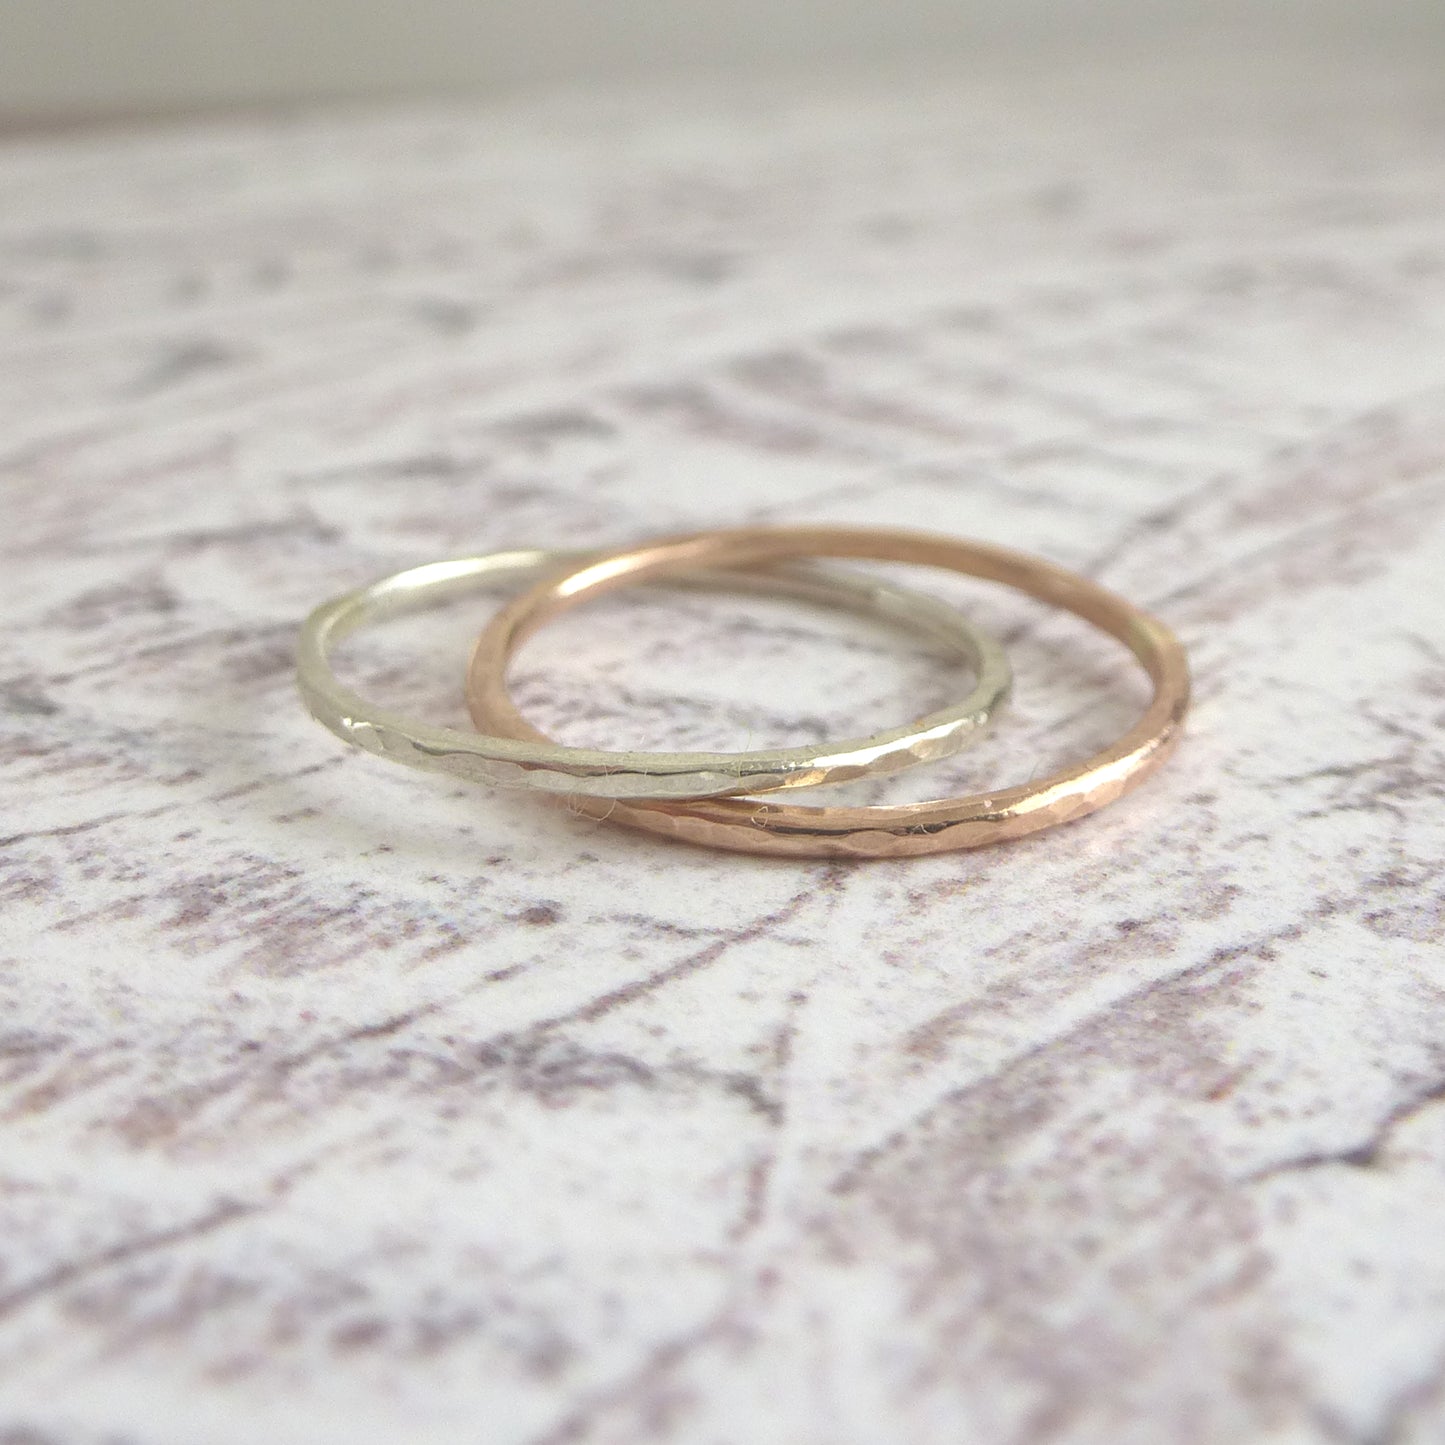 A pair of joined or russian wedding ring style bands in 9ct white and rose gold, with a hammered finish